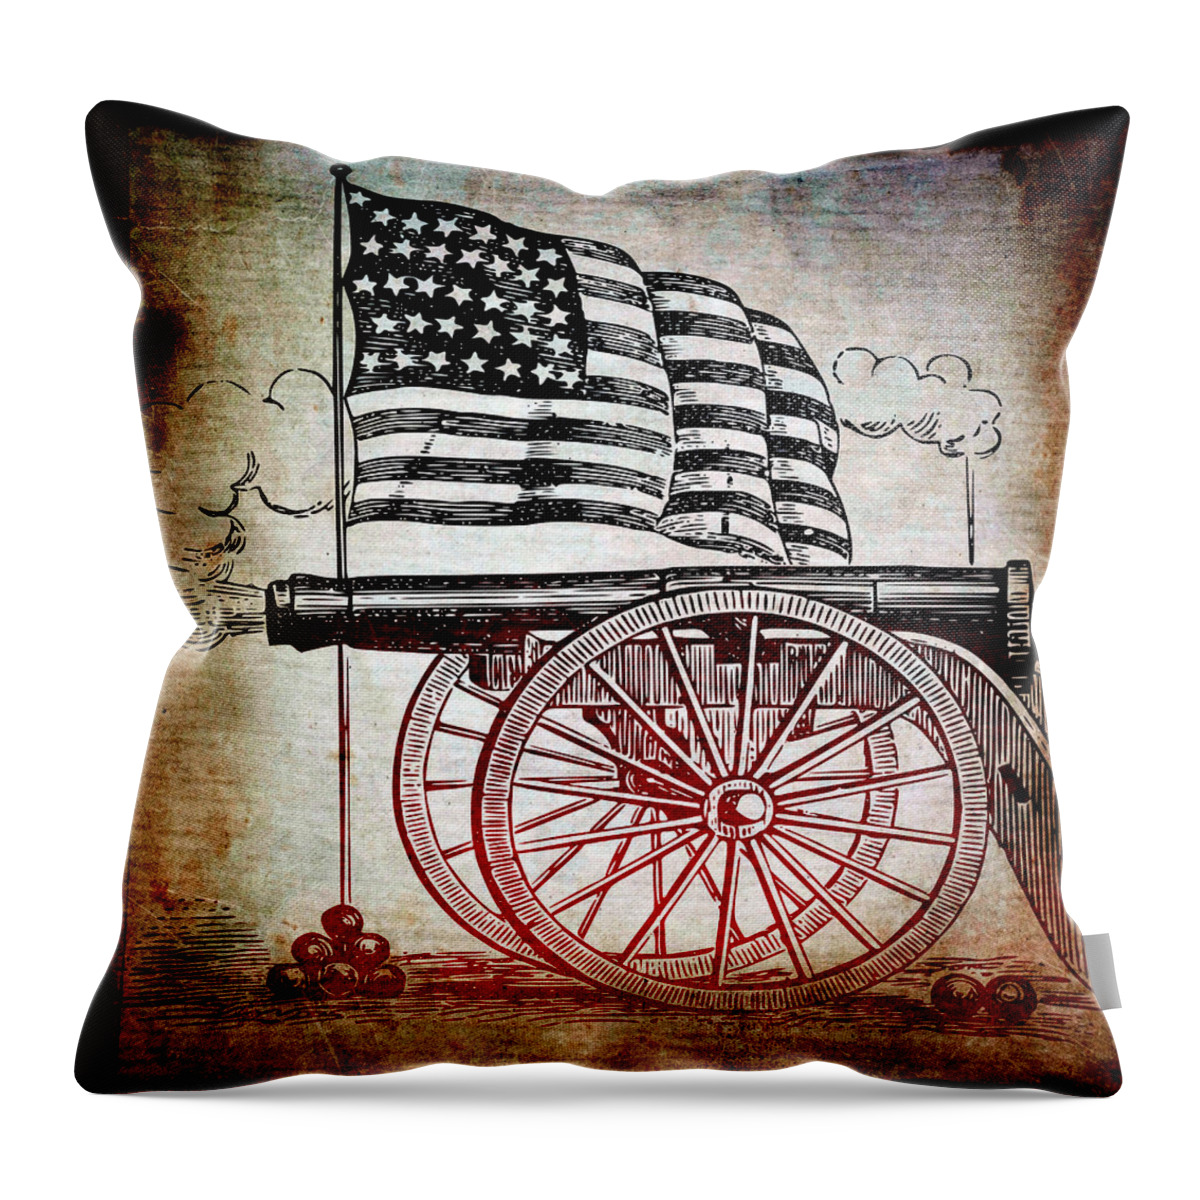 United Throw Pillow featuring the mixed media The Bombs Bursting In Air by Angelina Tamez